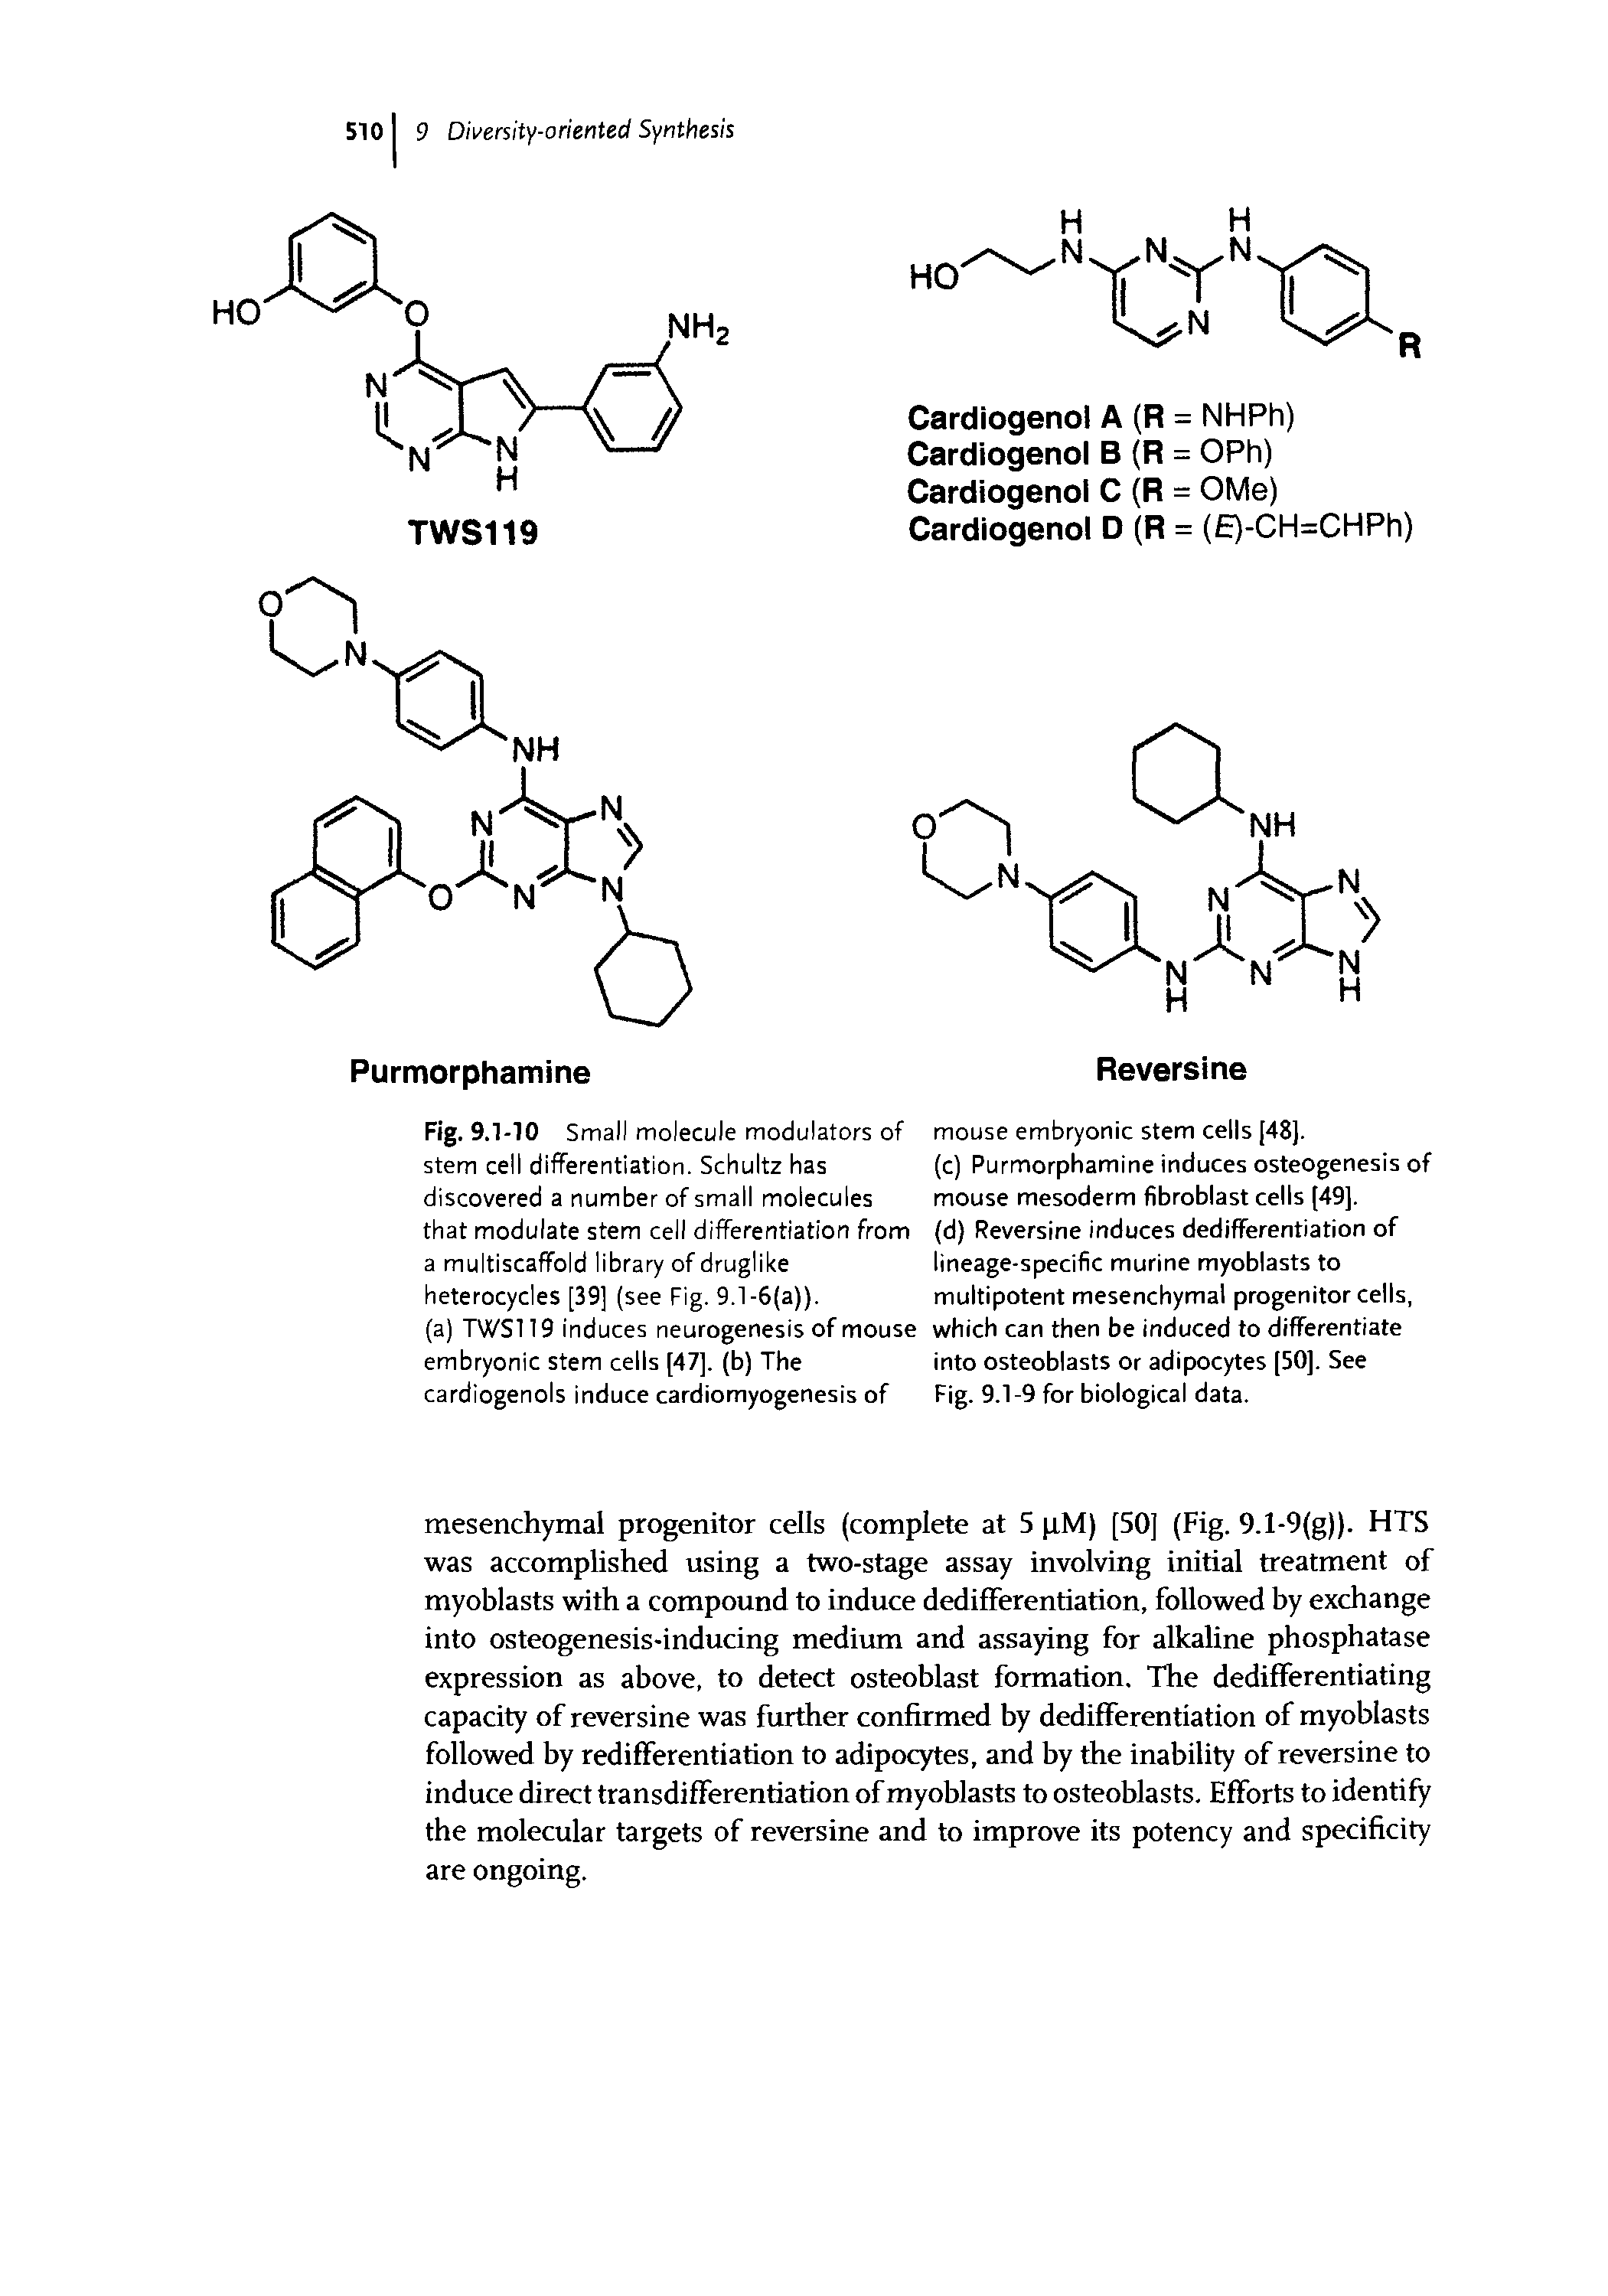 Fig. 9.1-10 Small molecule modulators of stem cell differentiation. Schultz has discovered a number of small molecules that modulate stem cell differentiation from a multiscaffold library of druglike heterocycles [39] (see Fig. 9.1-6(a)).